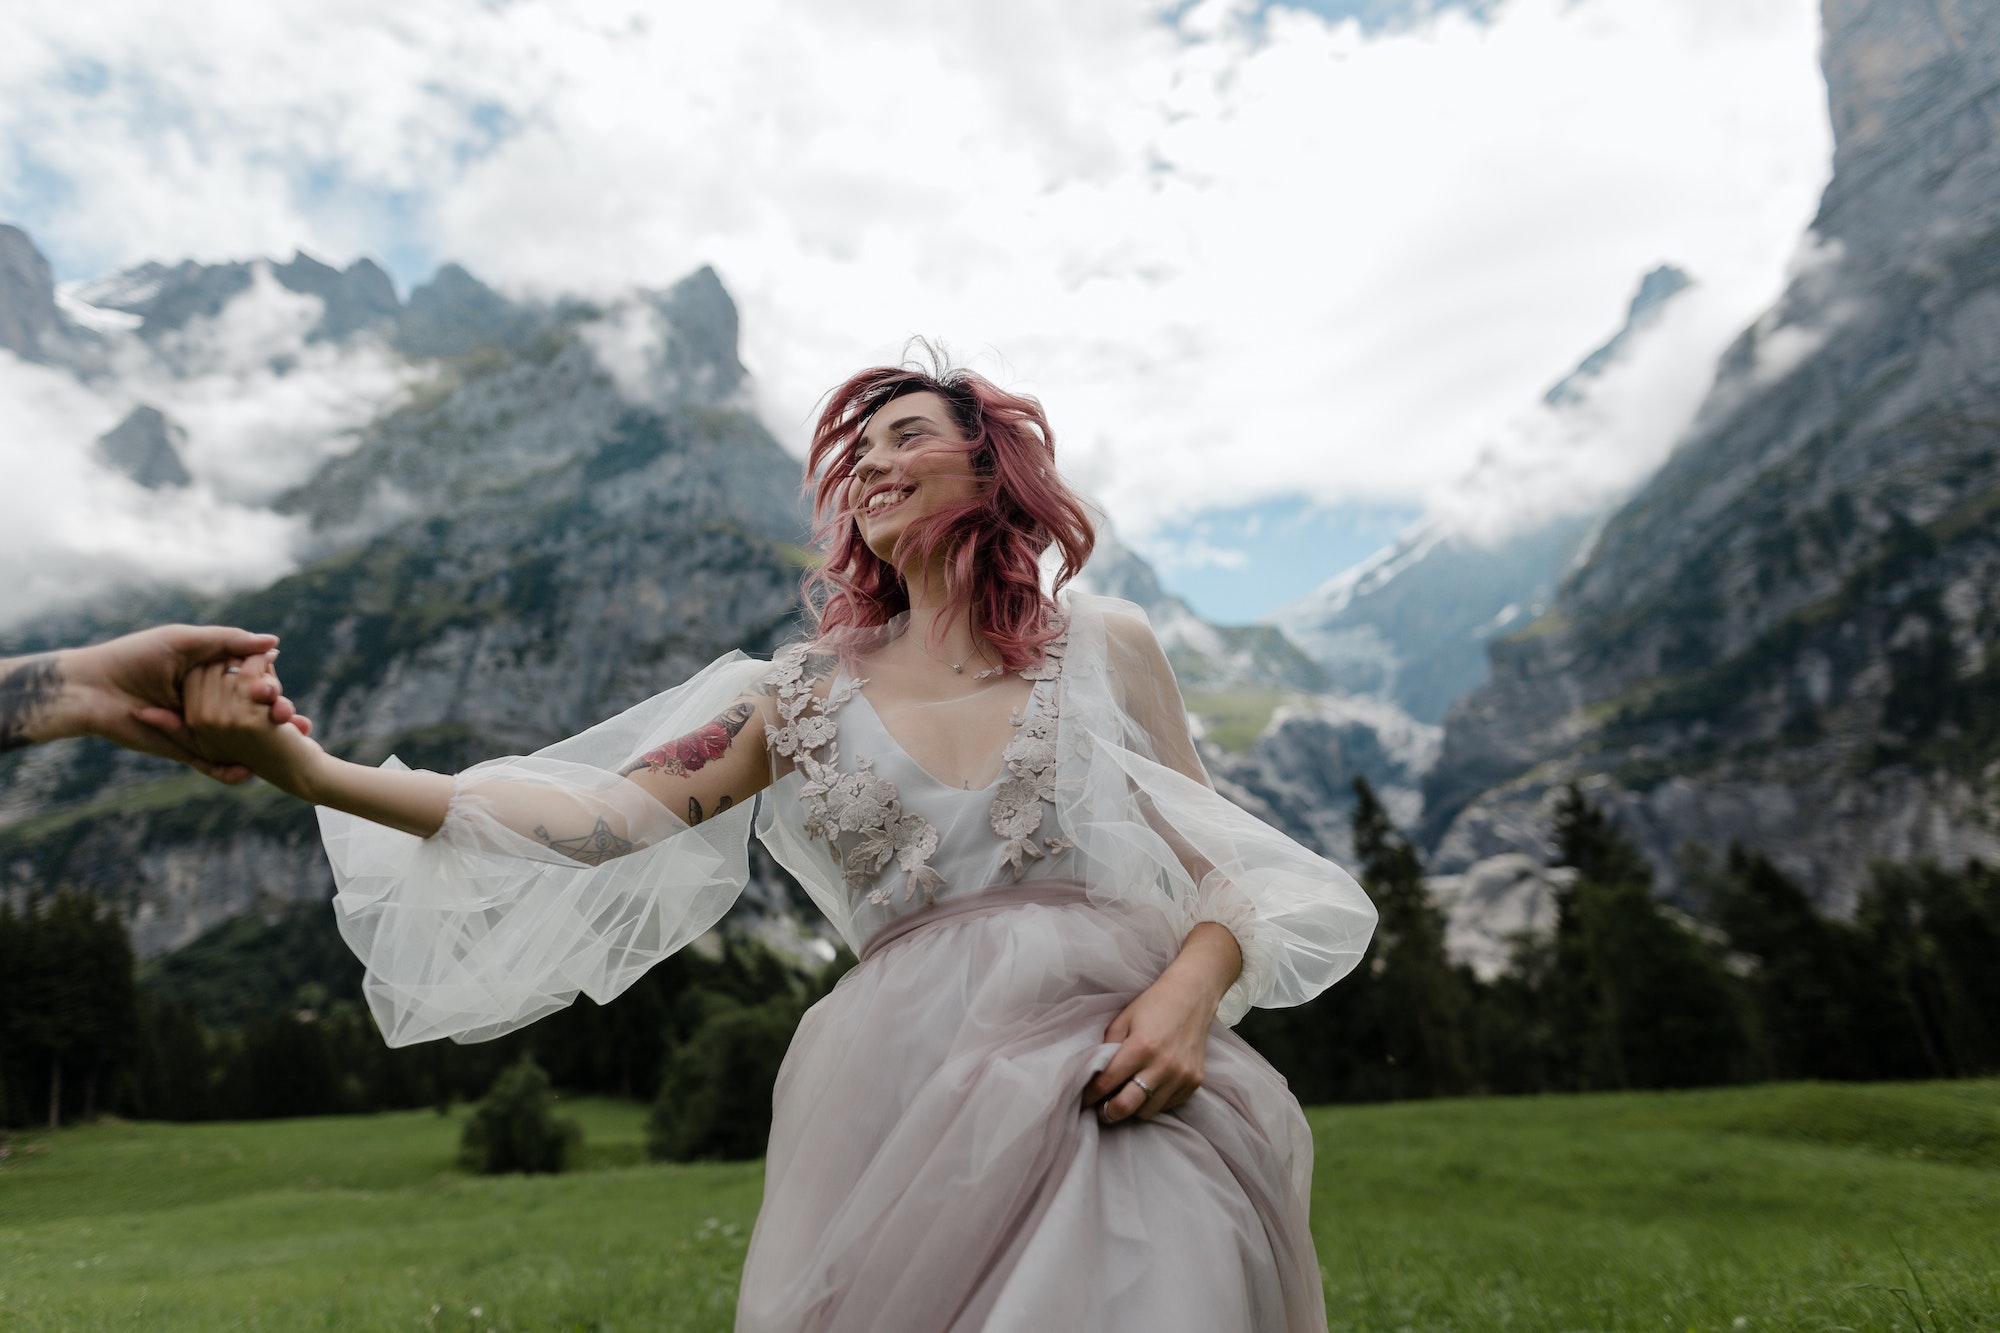 Happy Bride in Wedding Dress Holding Hands With Groom on Meadow With Mountains and Clouds in Alps